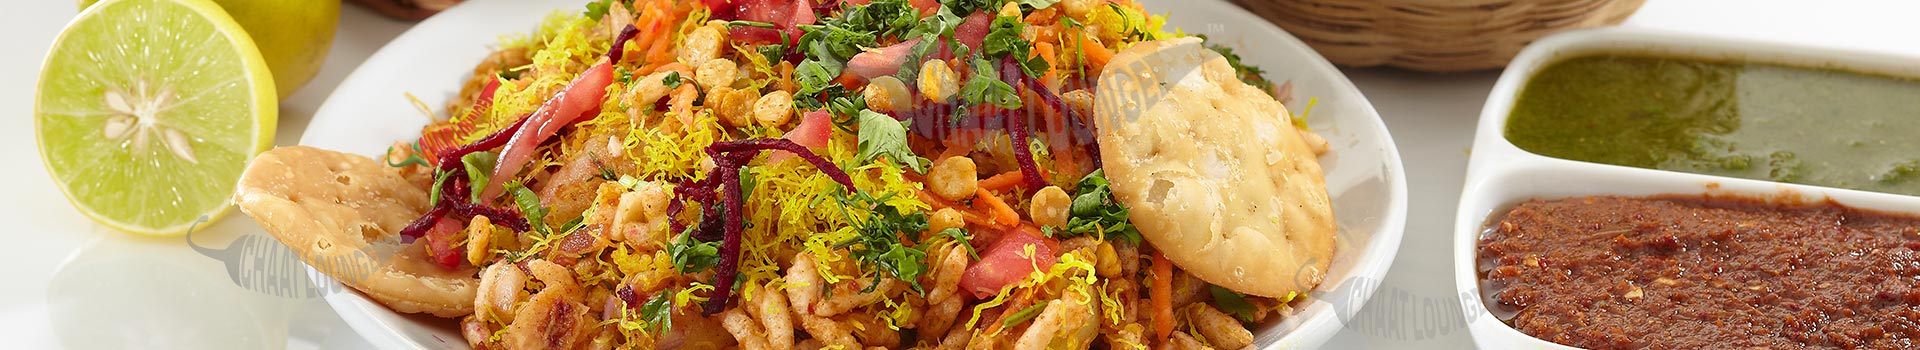 Chaat Franchise Restaurants In India, Chaat Menu, Franchise For Indian Fast Food In India